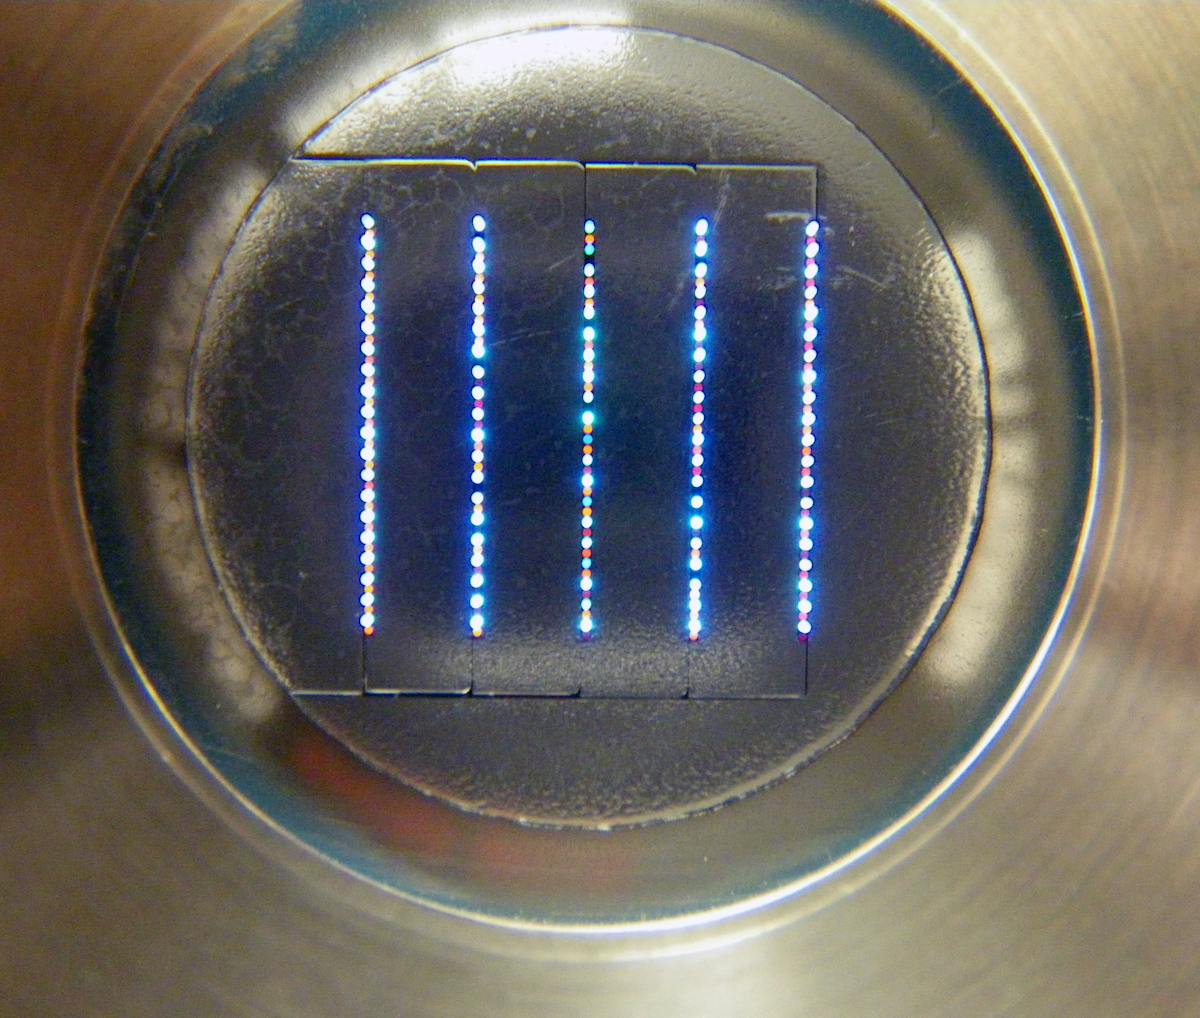 FIGURE 2. An optical-mechanical connection to entrance slits of a McPherson spectrometer contains 100 signal fibers. This fiber array is actually made of 200 fibers, with alternate fibers illuminated for discrete spectrometer imaging.